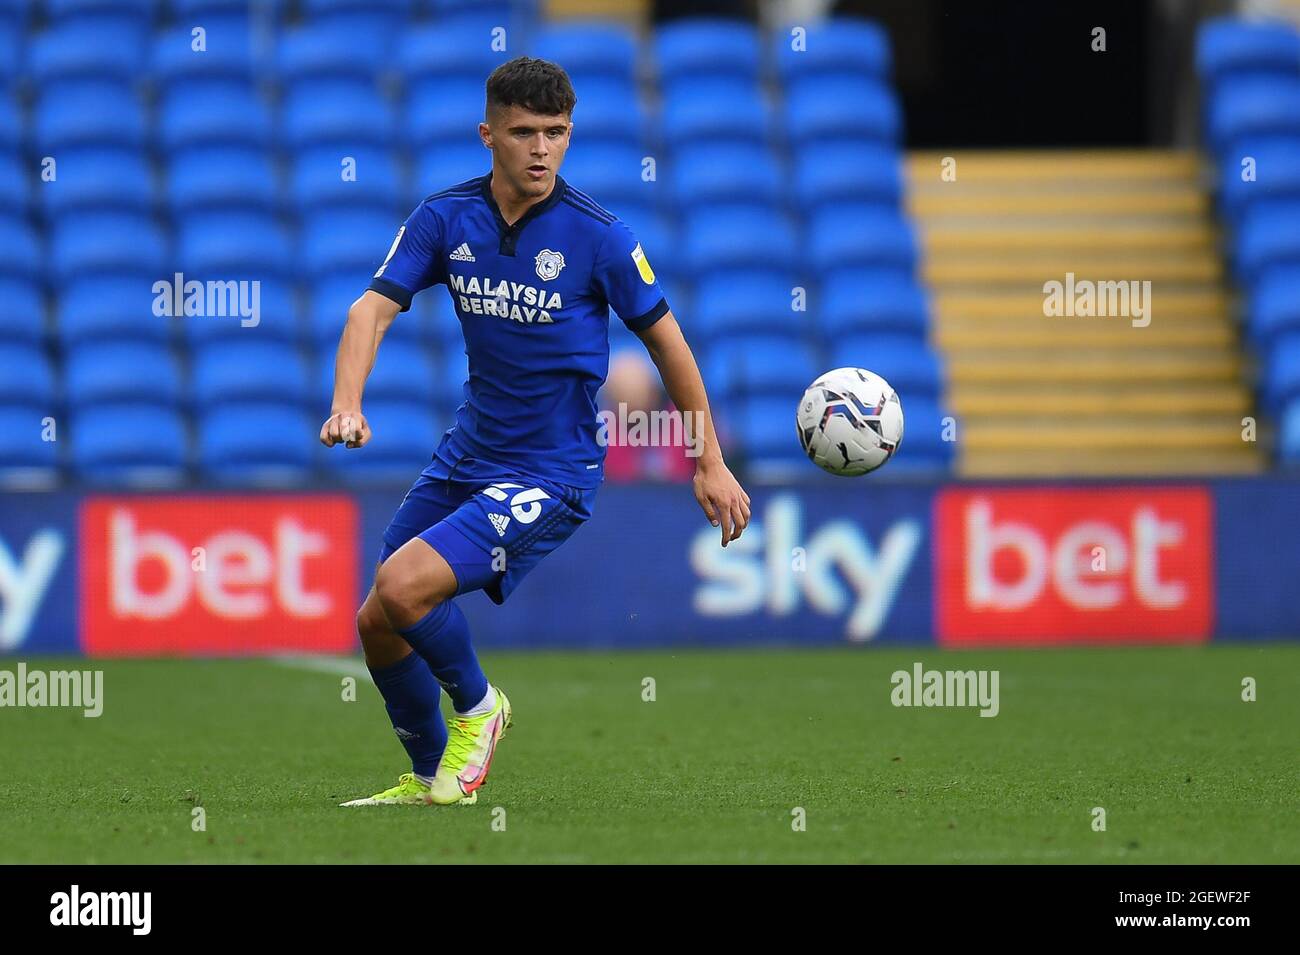 Ryan Giles #26 of Cardiff City in action during the game Stock Photo